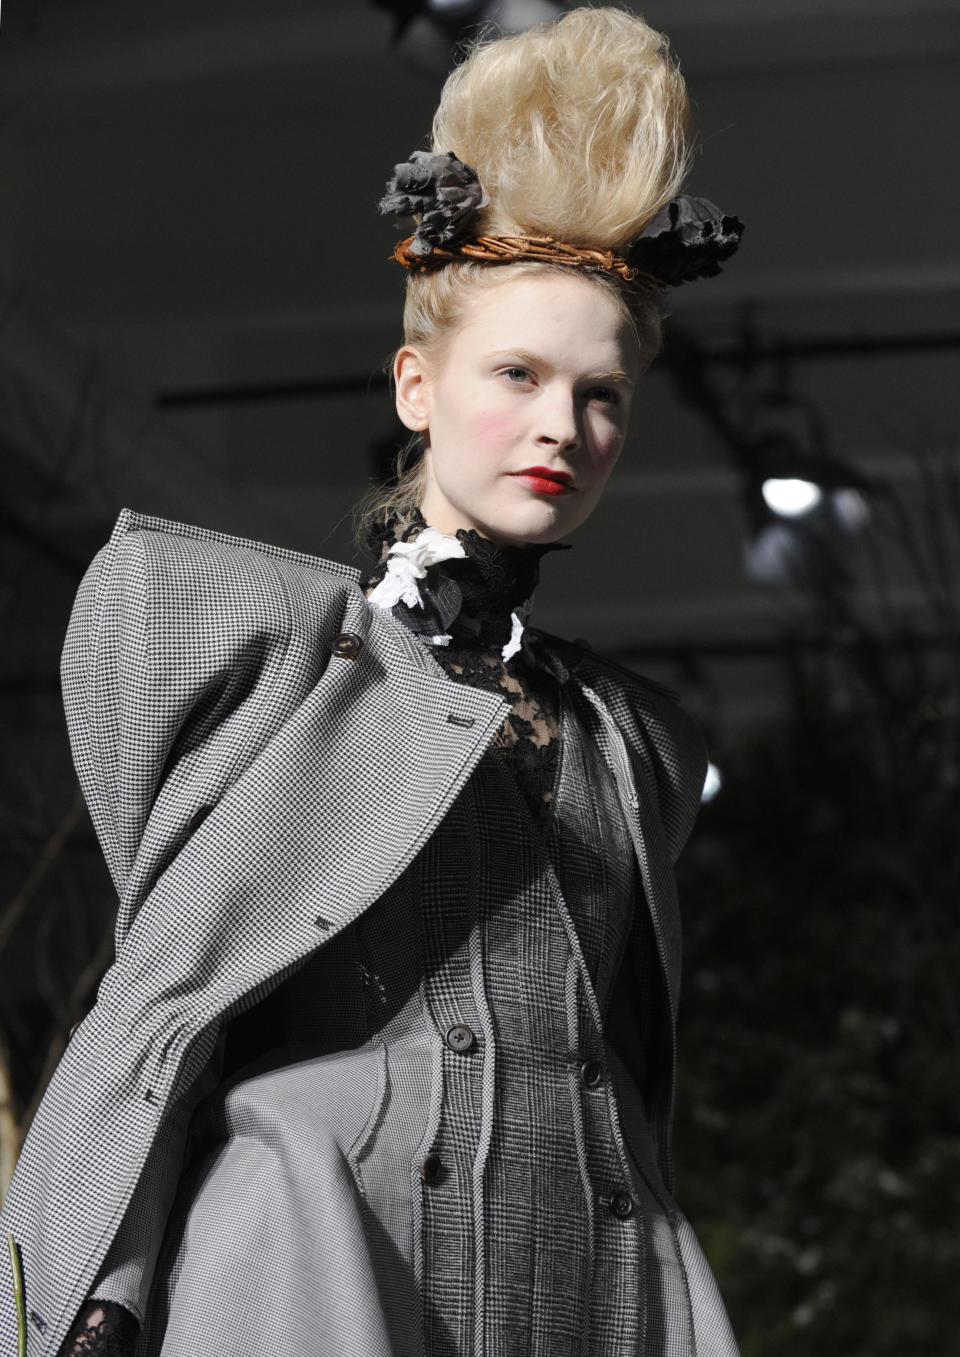 The Thom Browne Fall 2013 collection is modeled during Fashion Week, Monday, Feb. 11, 2013, in New York. (AP Photo/Louis Lanzano)